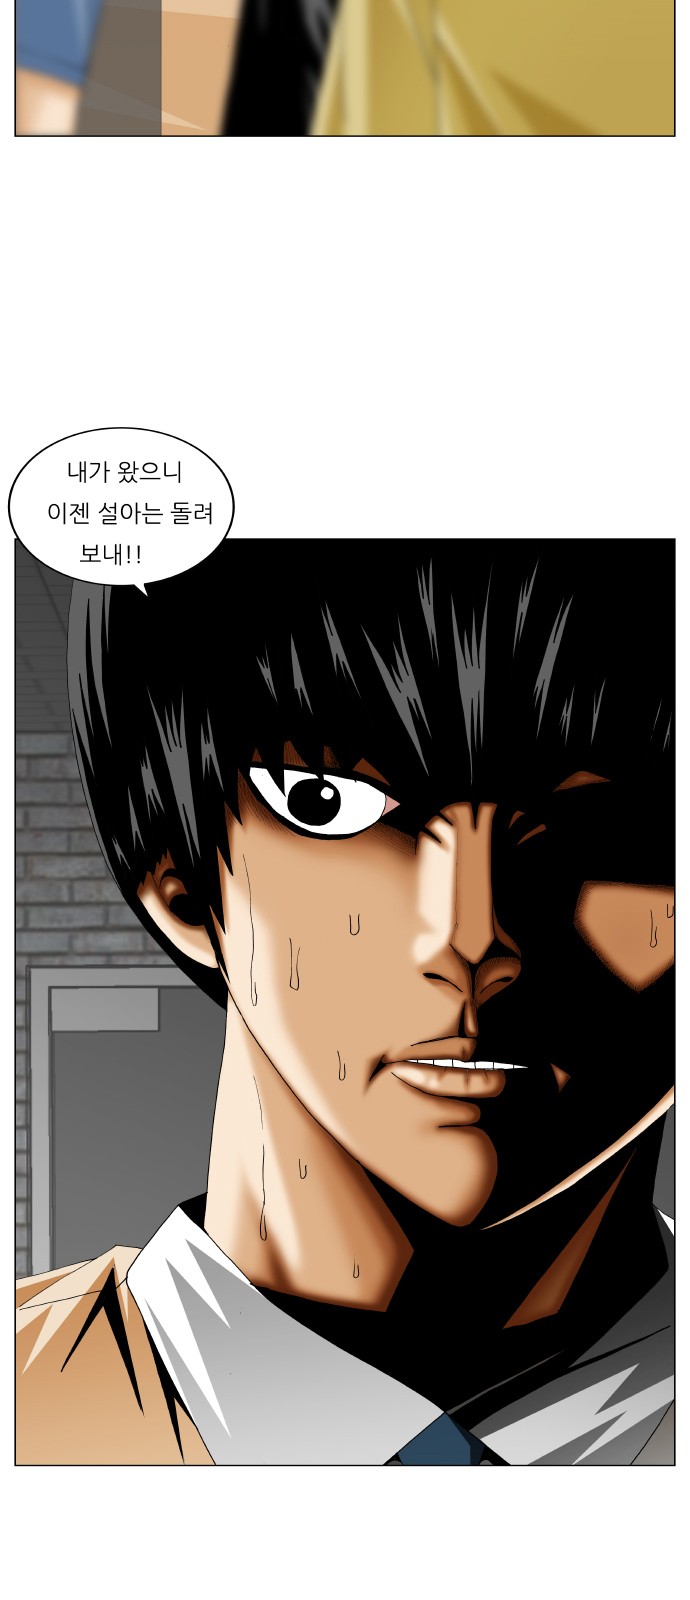 Ultimate Legend - Kang Hae Hyo - Chapter 239 - Page 2